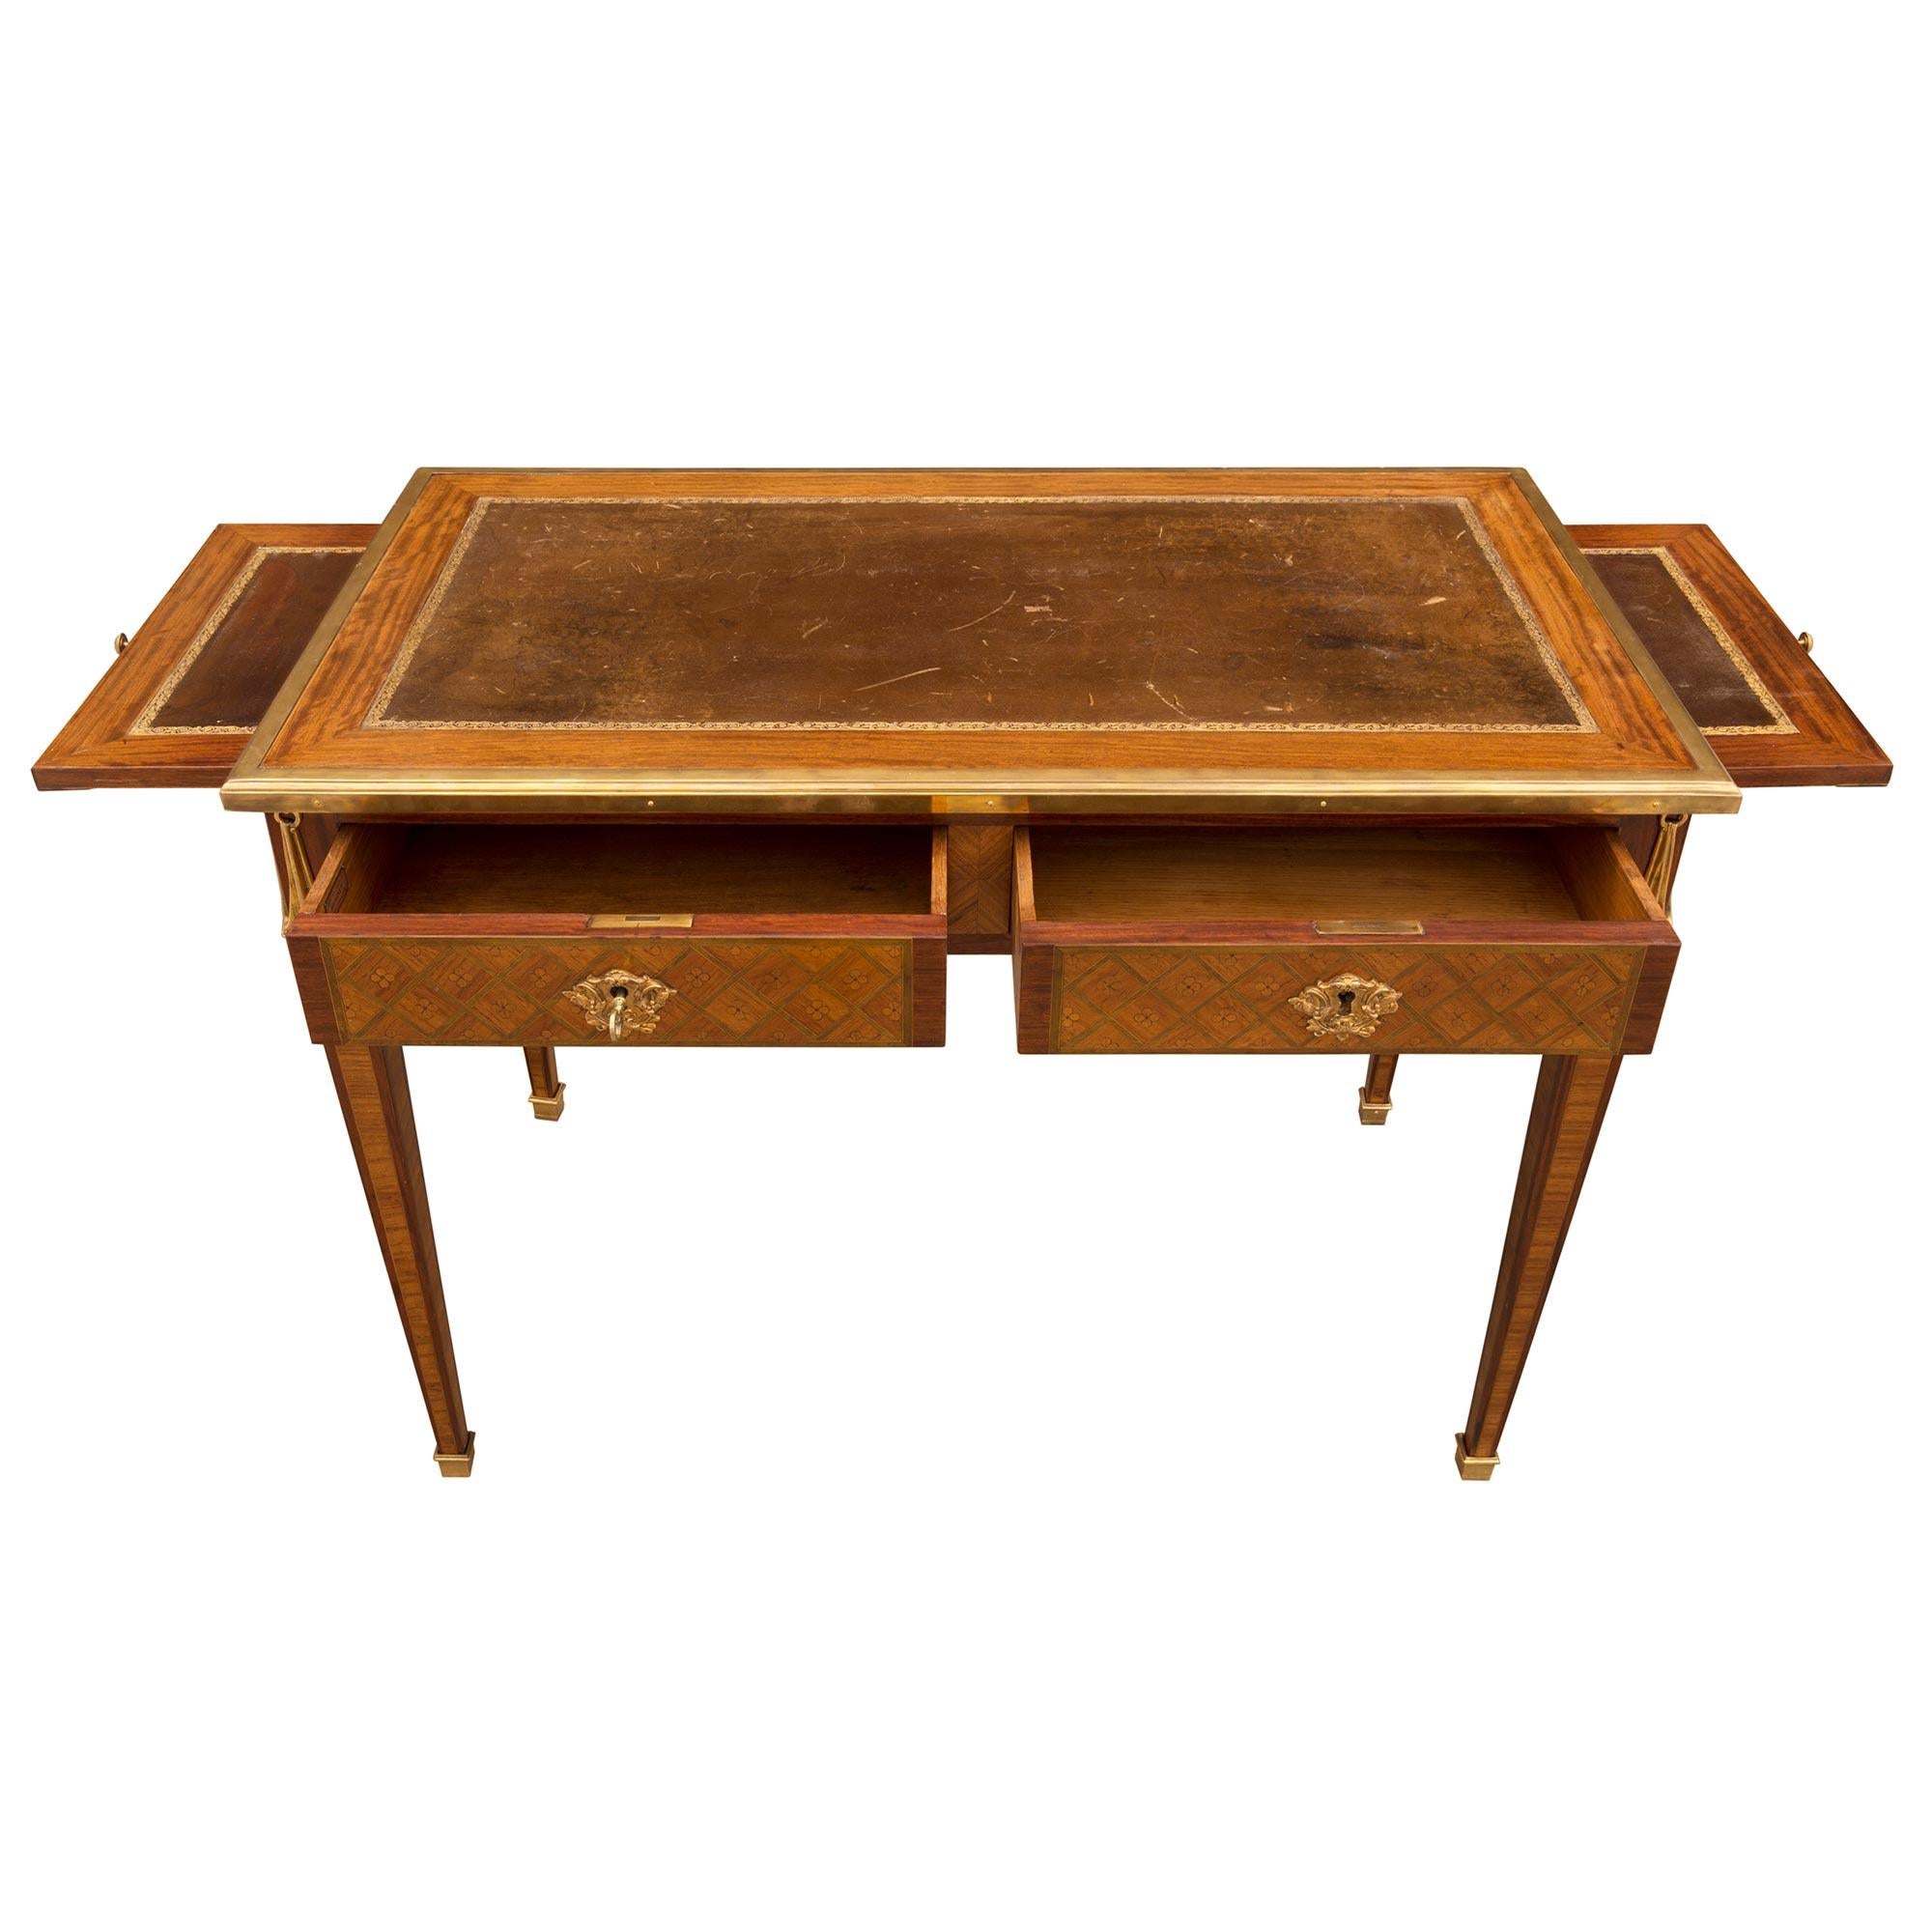 French Mid-19th Century Louis XVI Style Tulipwood, Kingwood and Charmwood Desk In Good Condition For Sale In West Palm Beach, FL